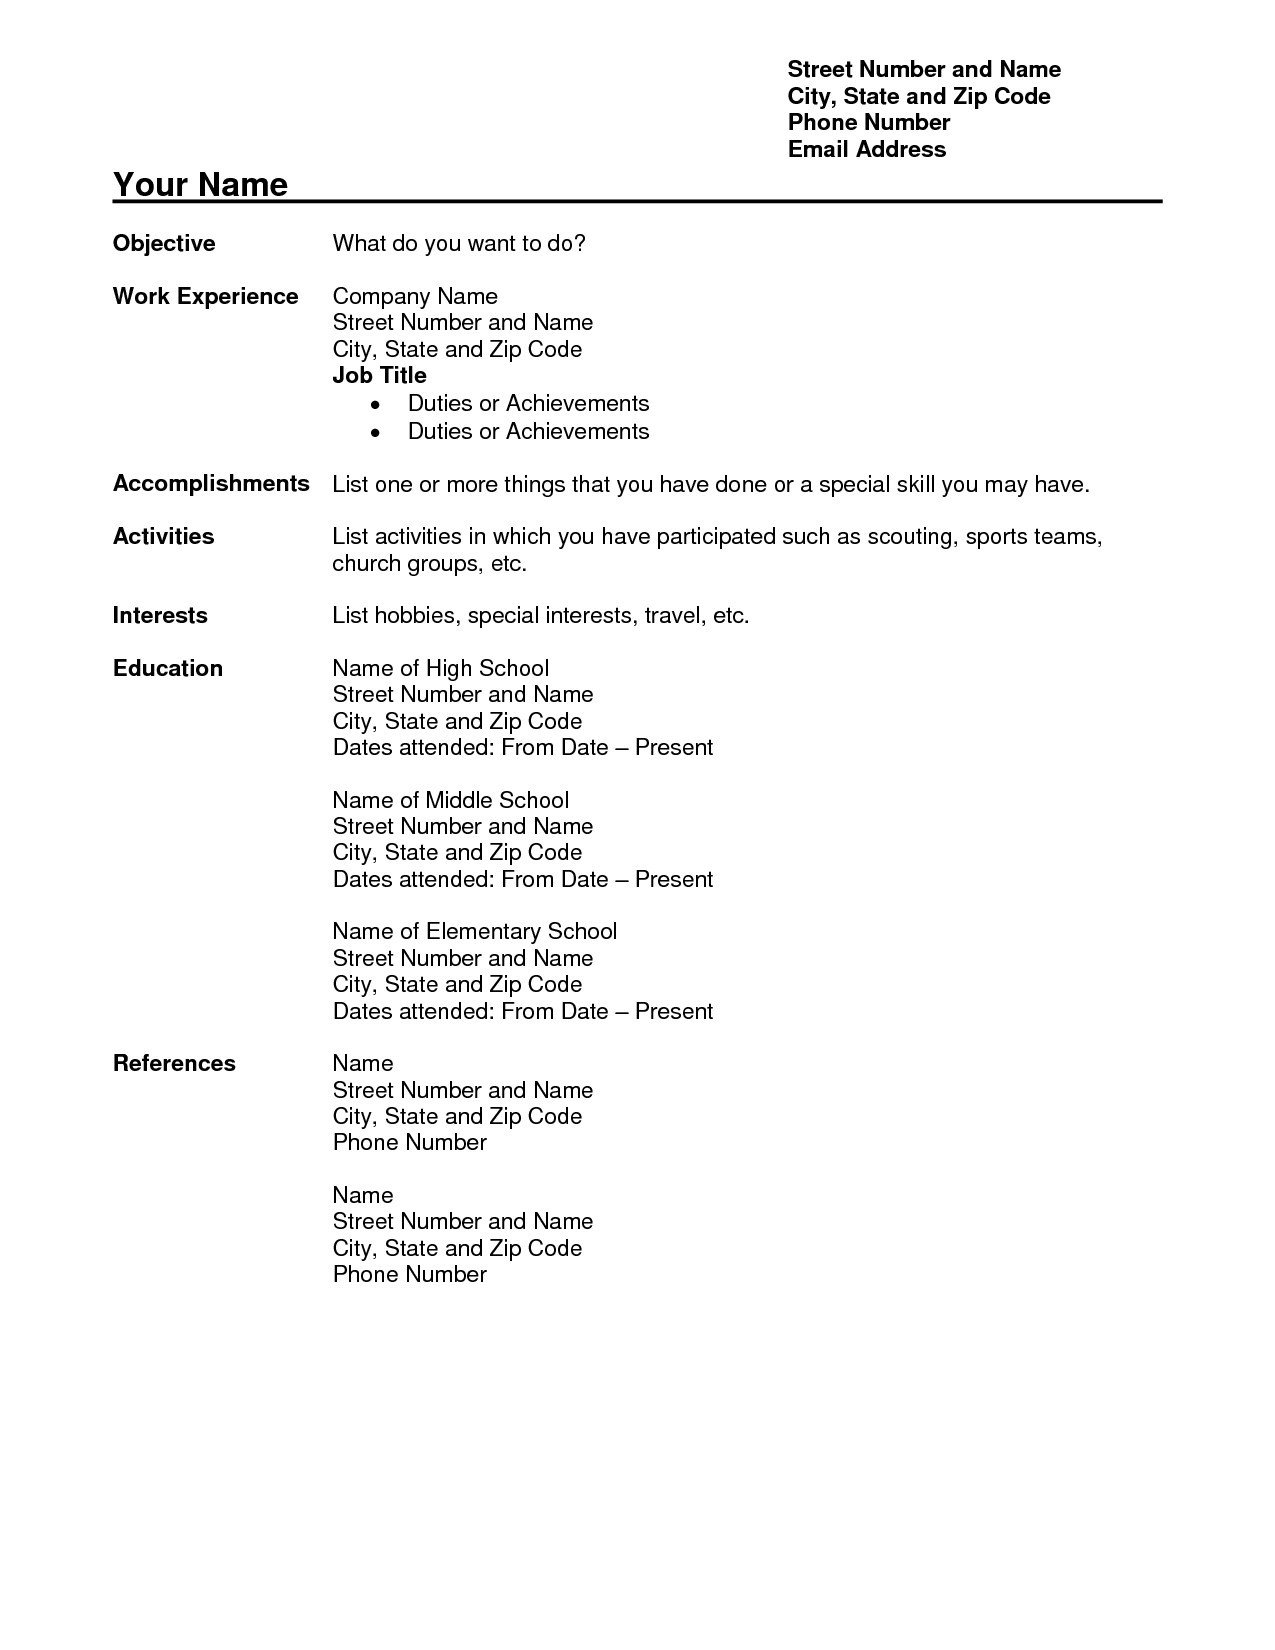 Resume Templates Microsoft Works Word Processor Best Free within dimensions 1275 X 1650